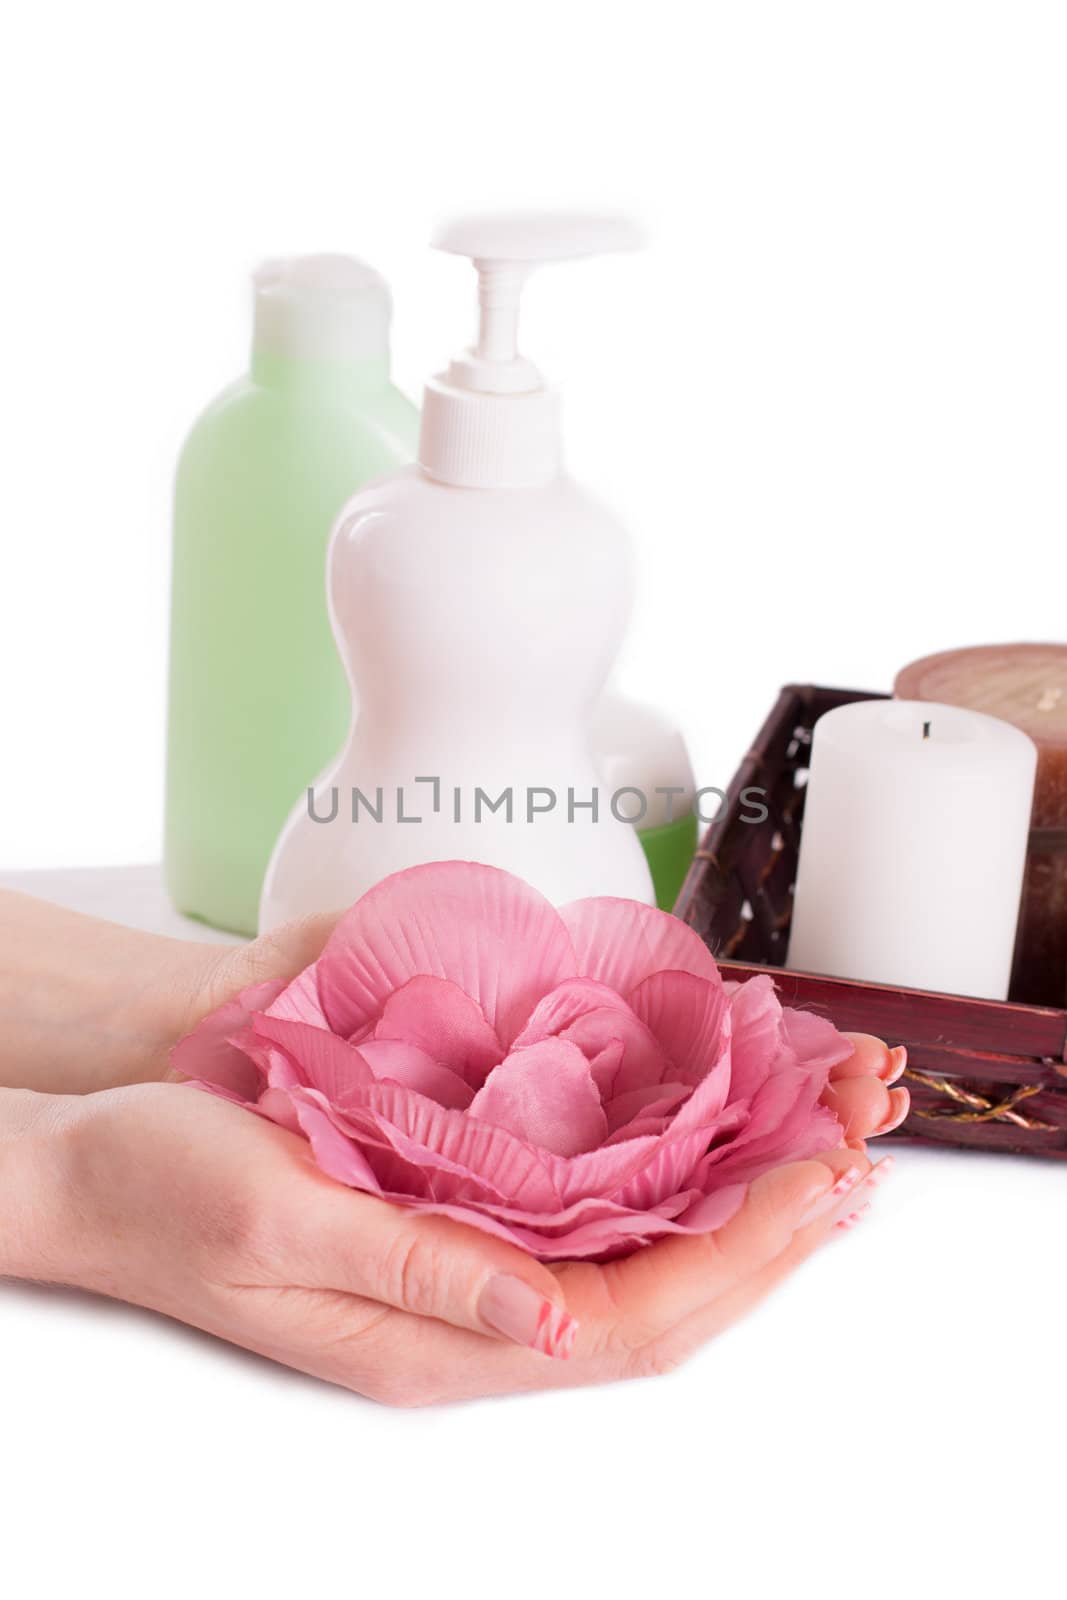 Woman hands with manicure and hand care products on white